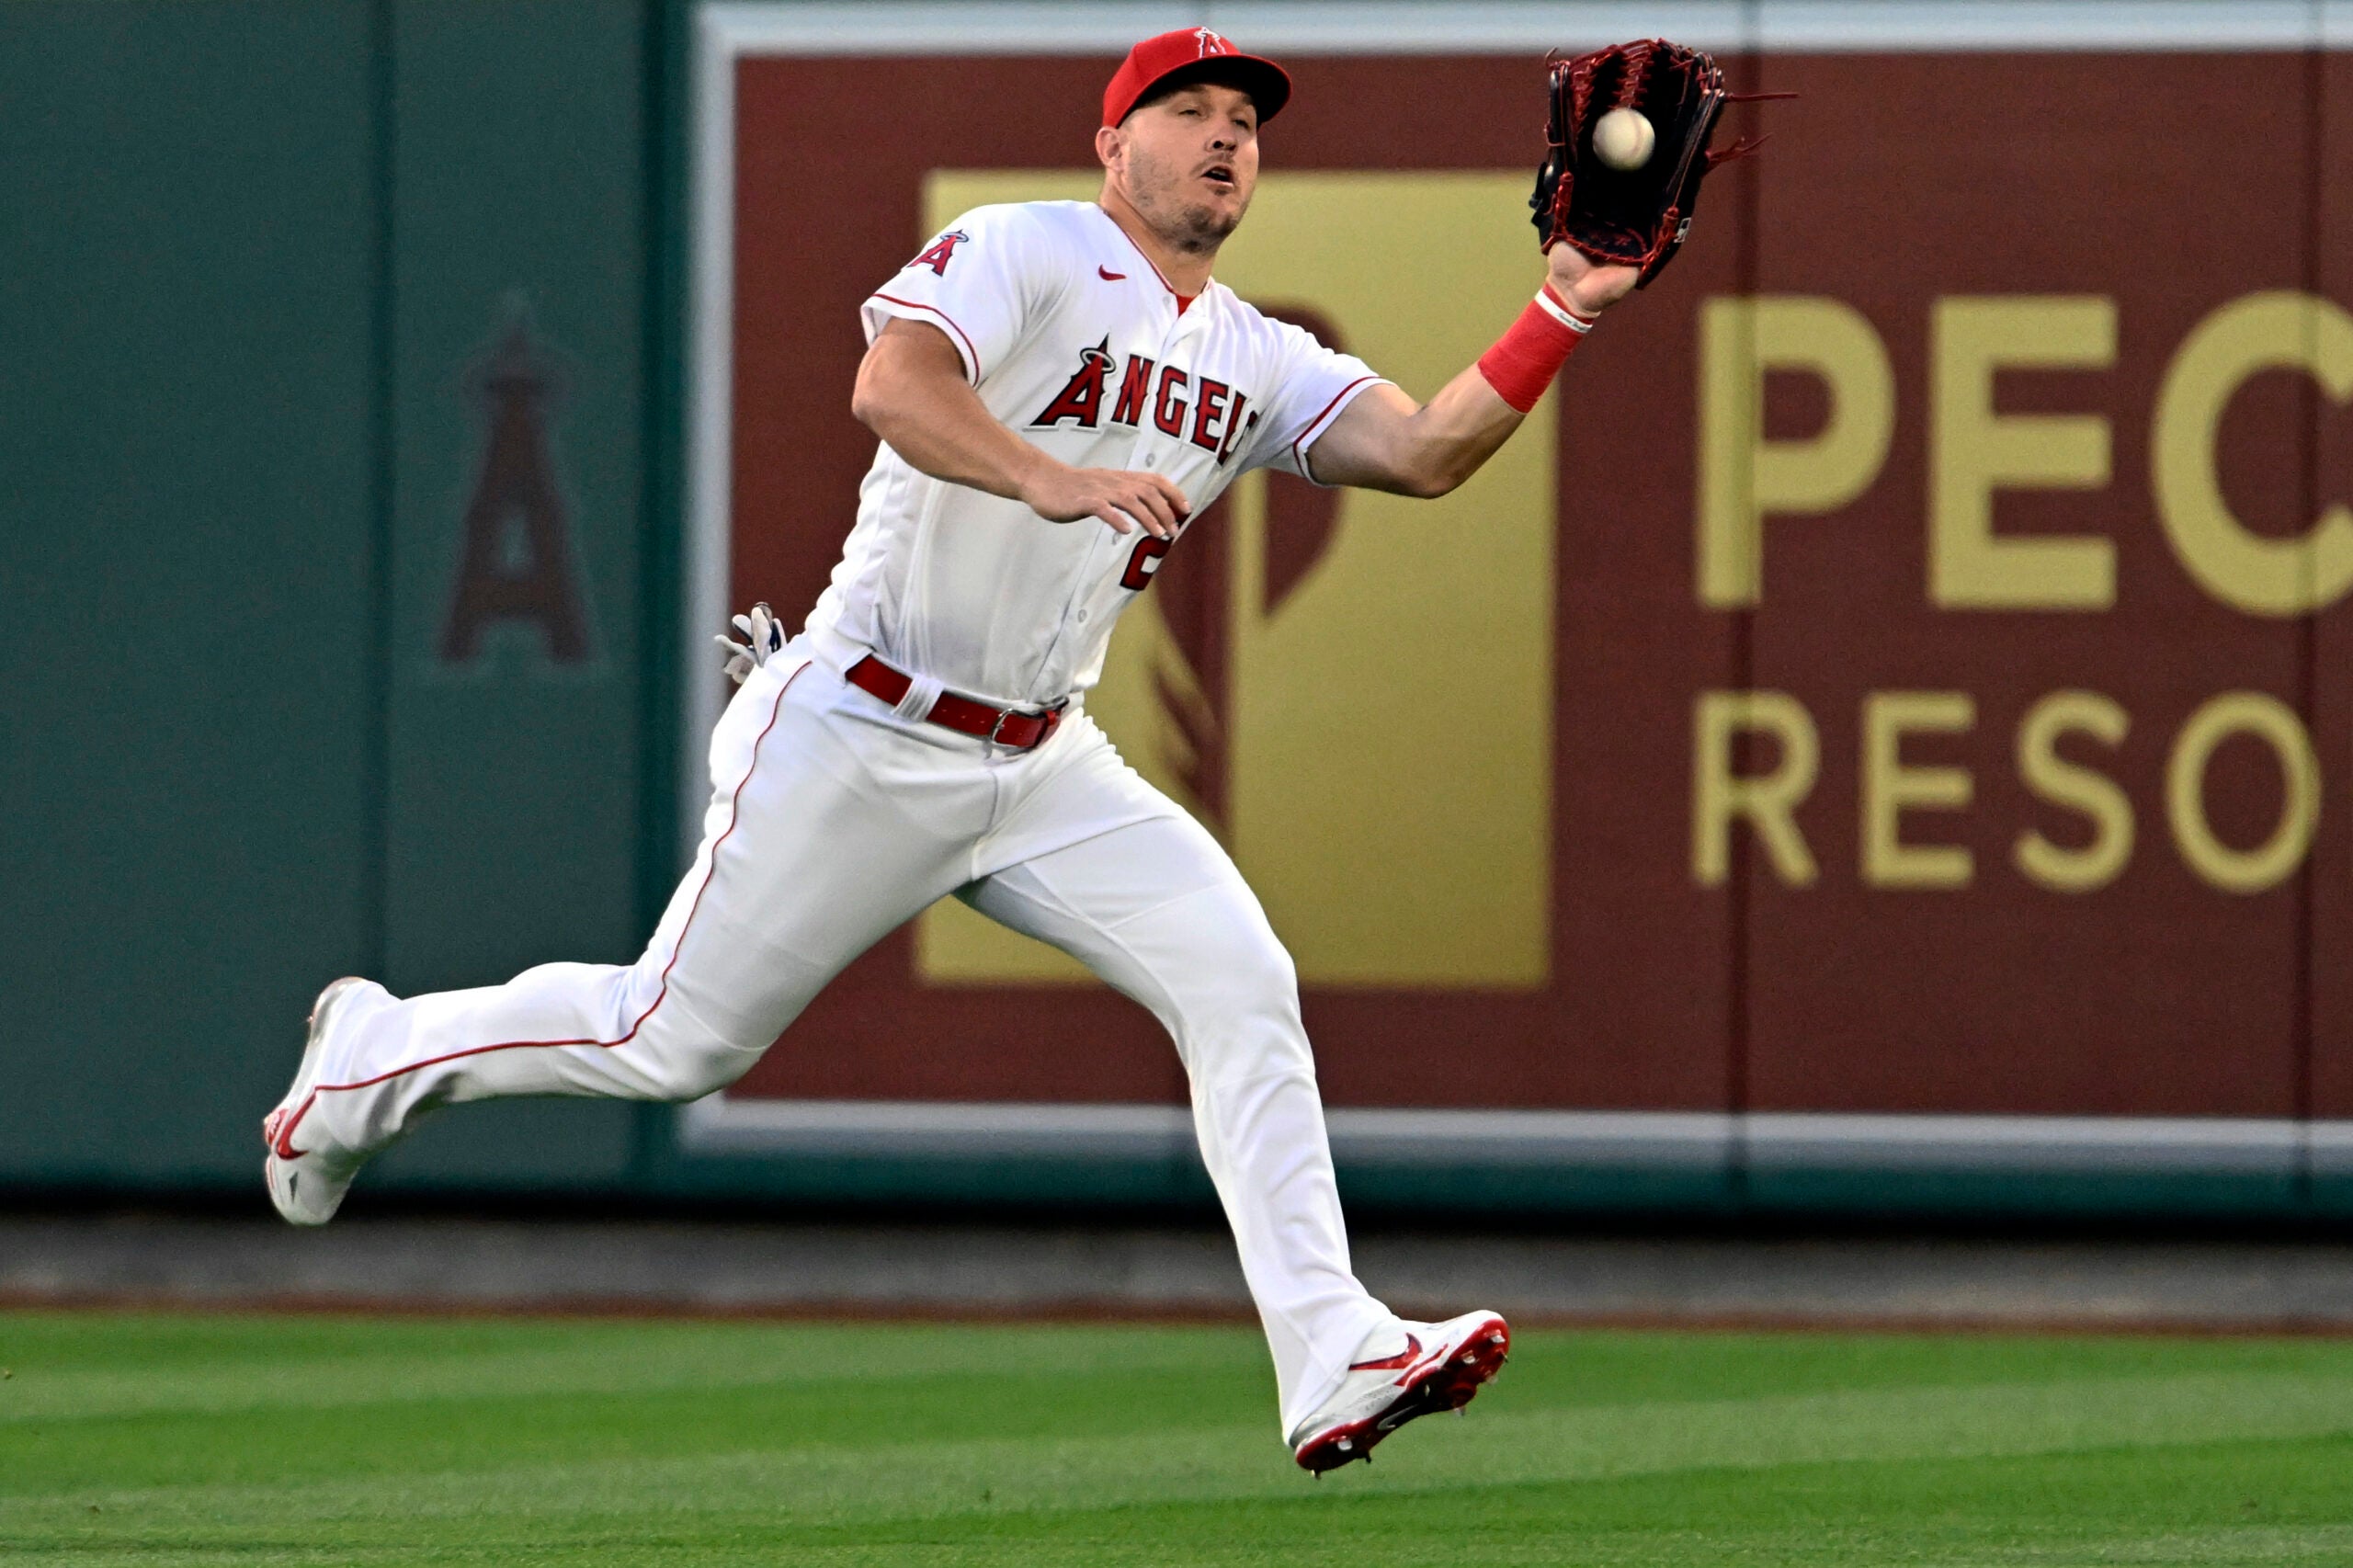 Los Angeles Angels center fielder Mike Trout runs to catch a fly ball hit by Boston Red Sox's Pablo Reyes during the fifth inning.